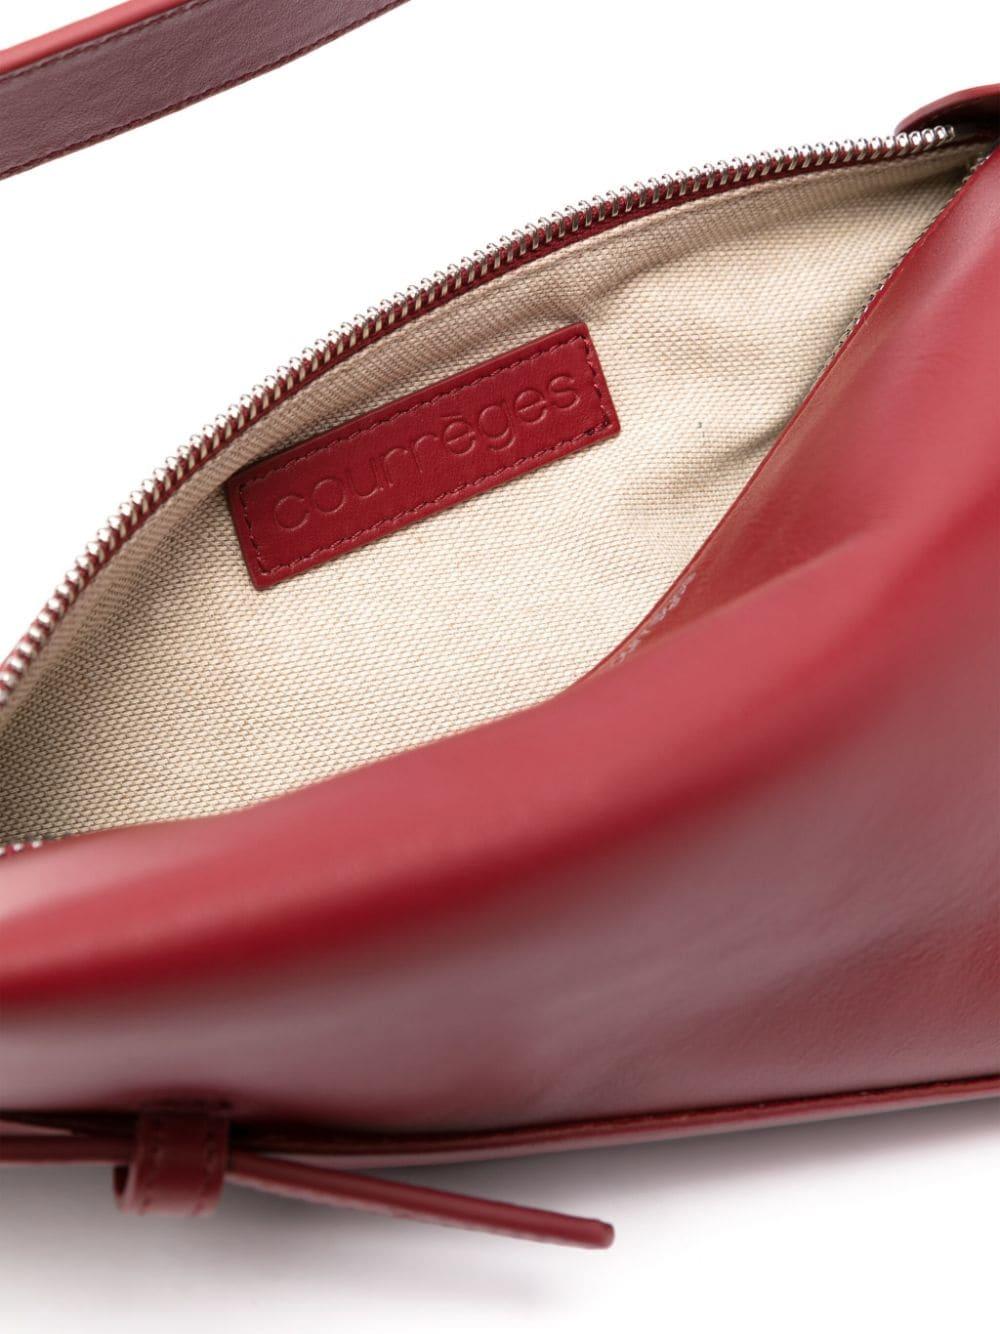 Courreges The One Leather Shoulder Bag in Red